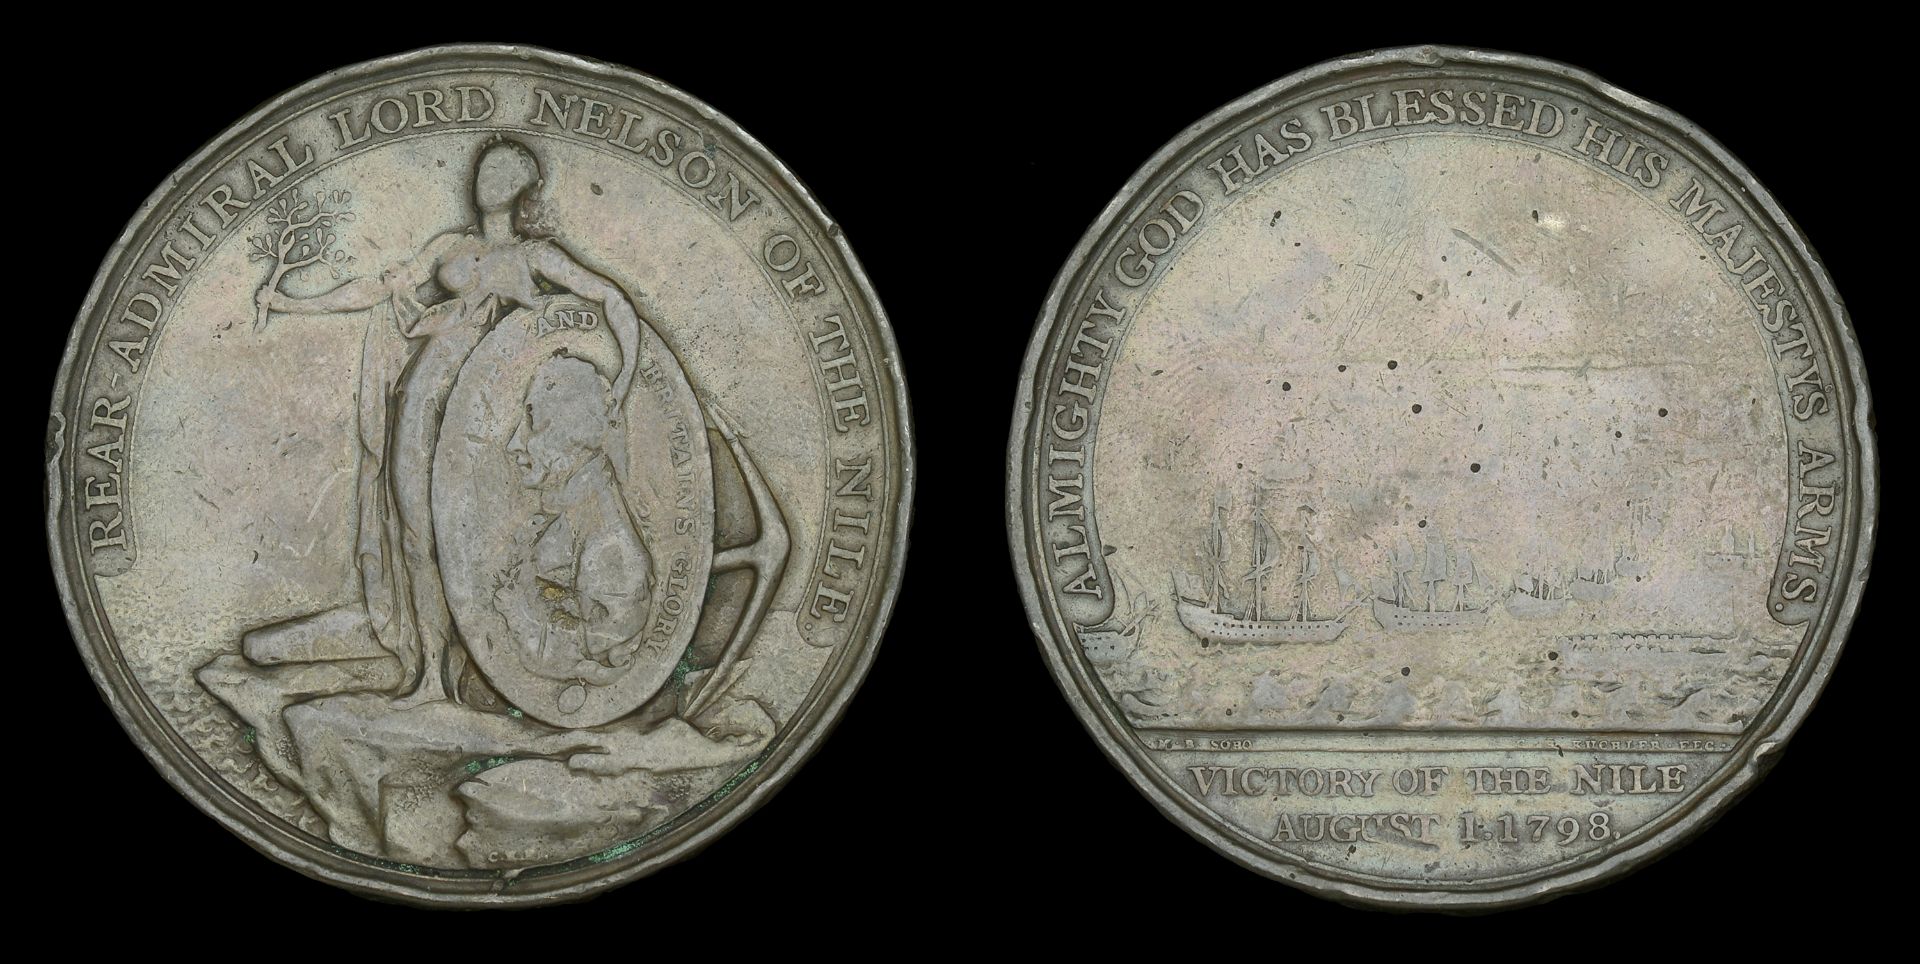 Alexander Davison's Medal for The Nile 1798, bronze, unmounted, edge bruising and polished,...